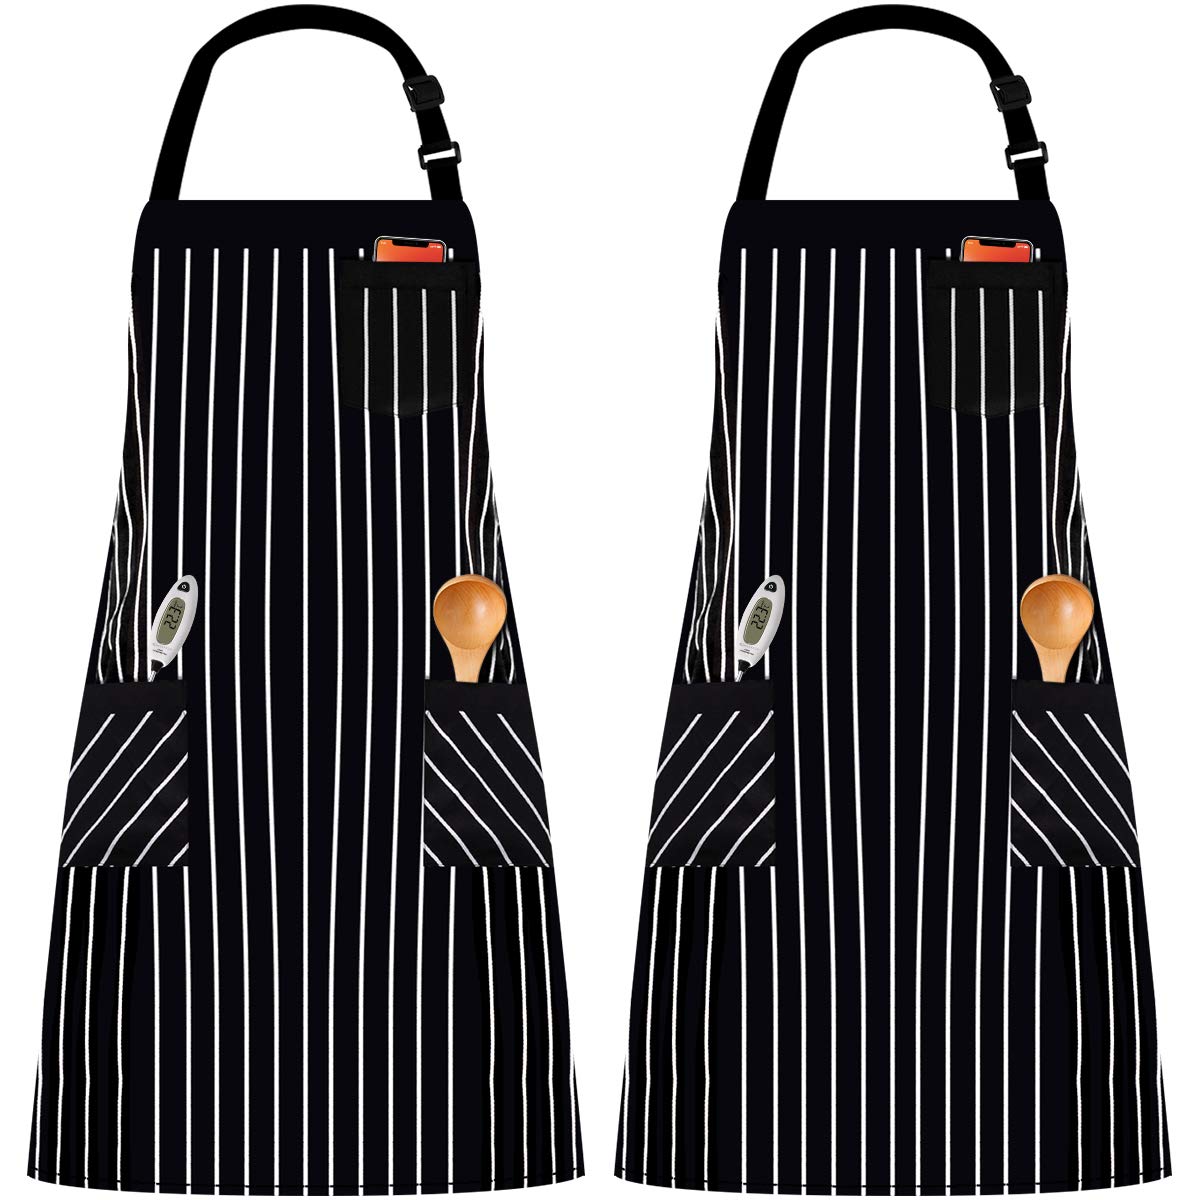 InnoGear 2 Pack Unisex Adjustable Bib Apron with 3 Pockets Cooking Kitchen Chef Women Men Aprons for Home Kitchen, Restaurant, Coffee house (Black, Polyester Yarn Dyed)